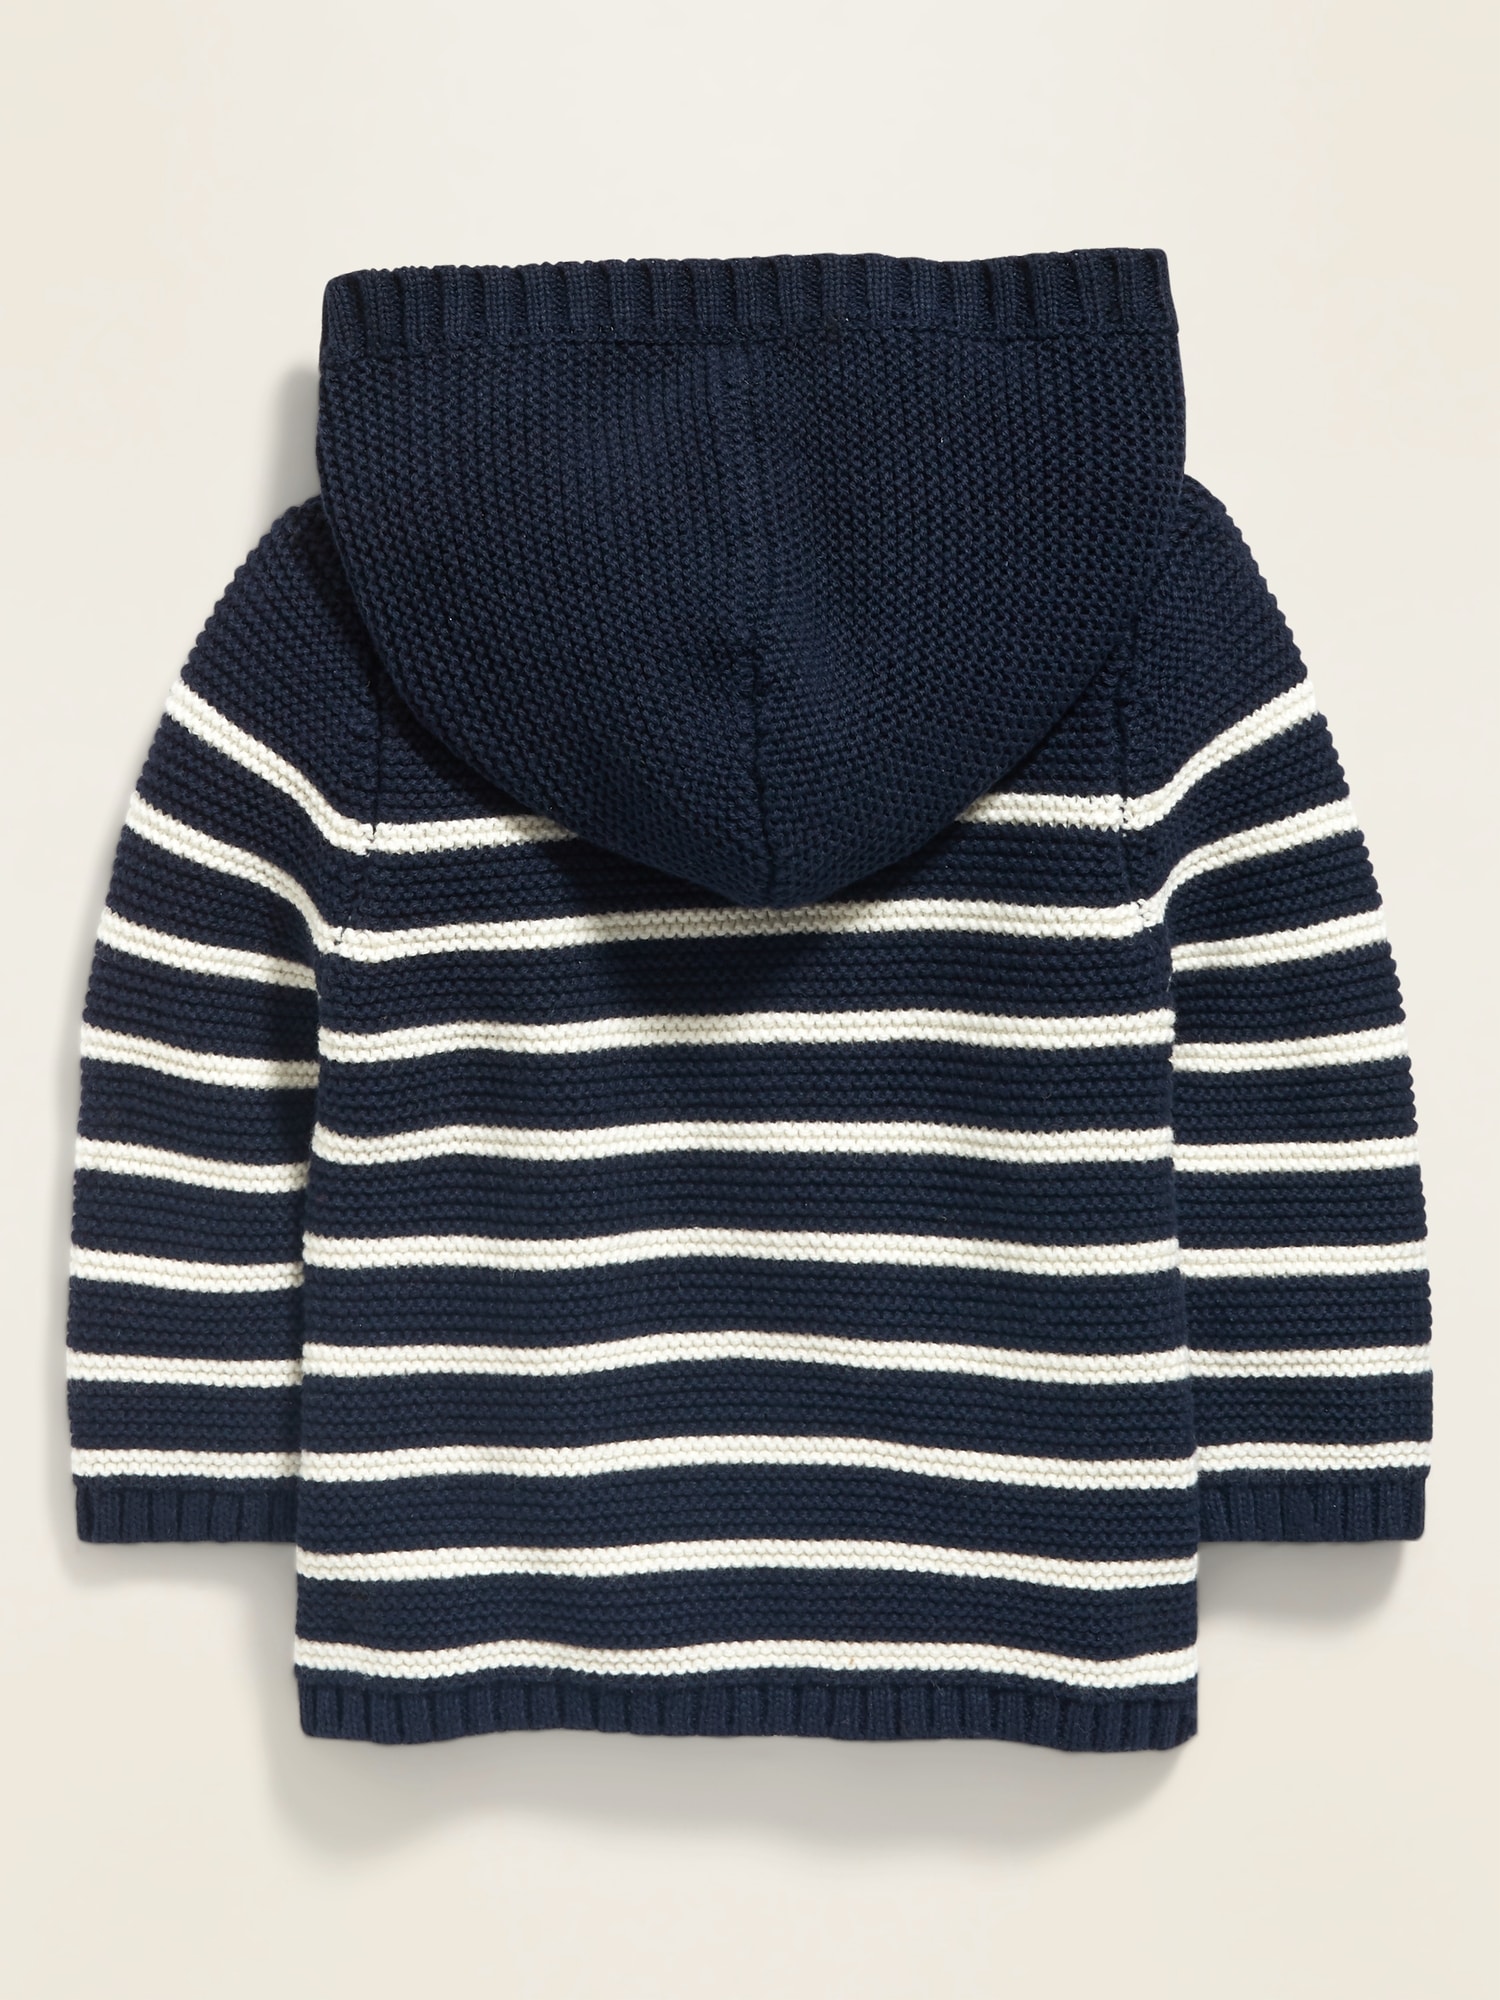 Unisex Hooded Button-Front Cardigan Sweater for Baby | Old Navy